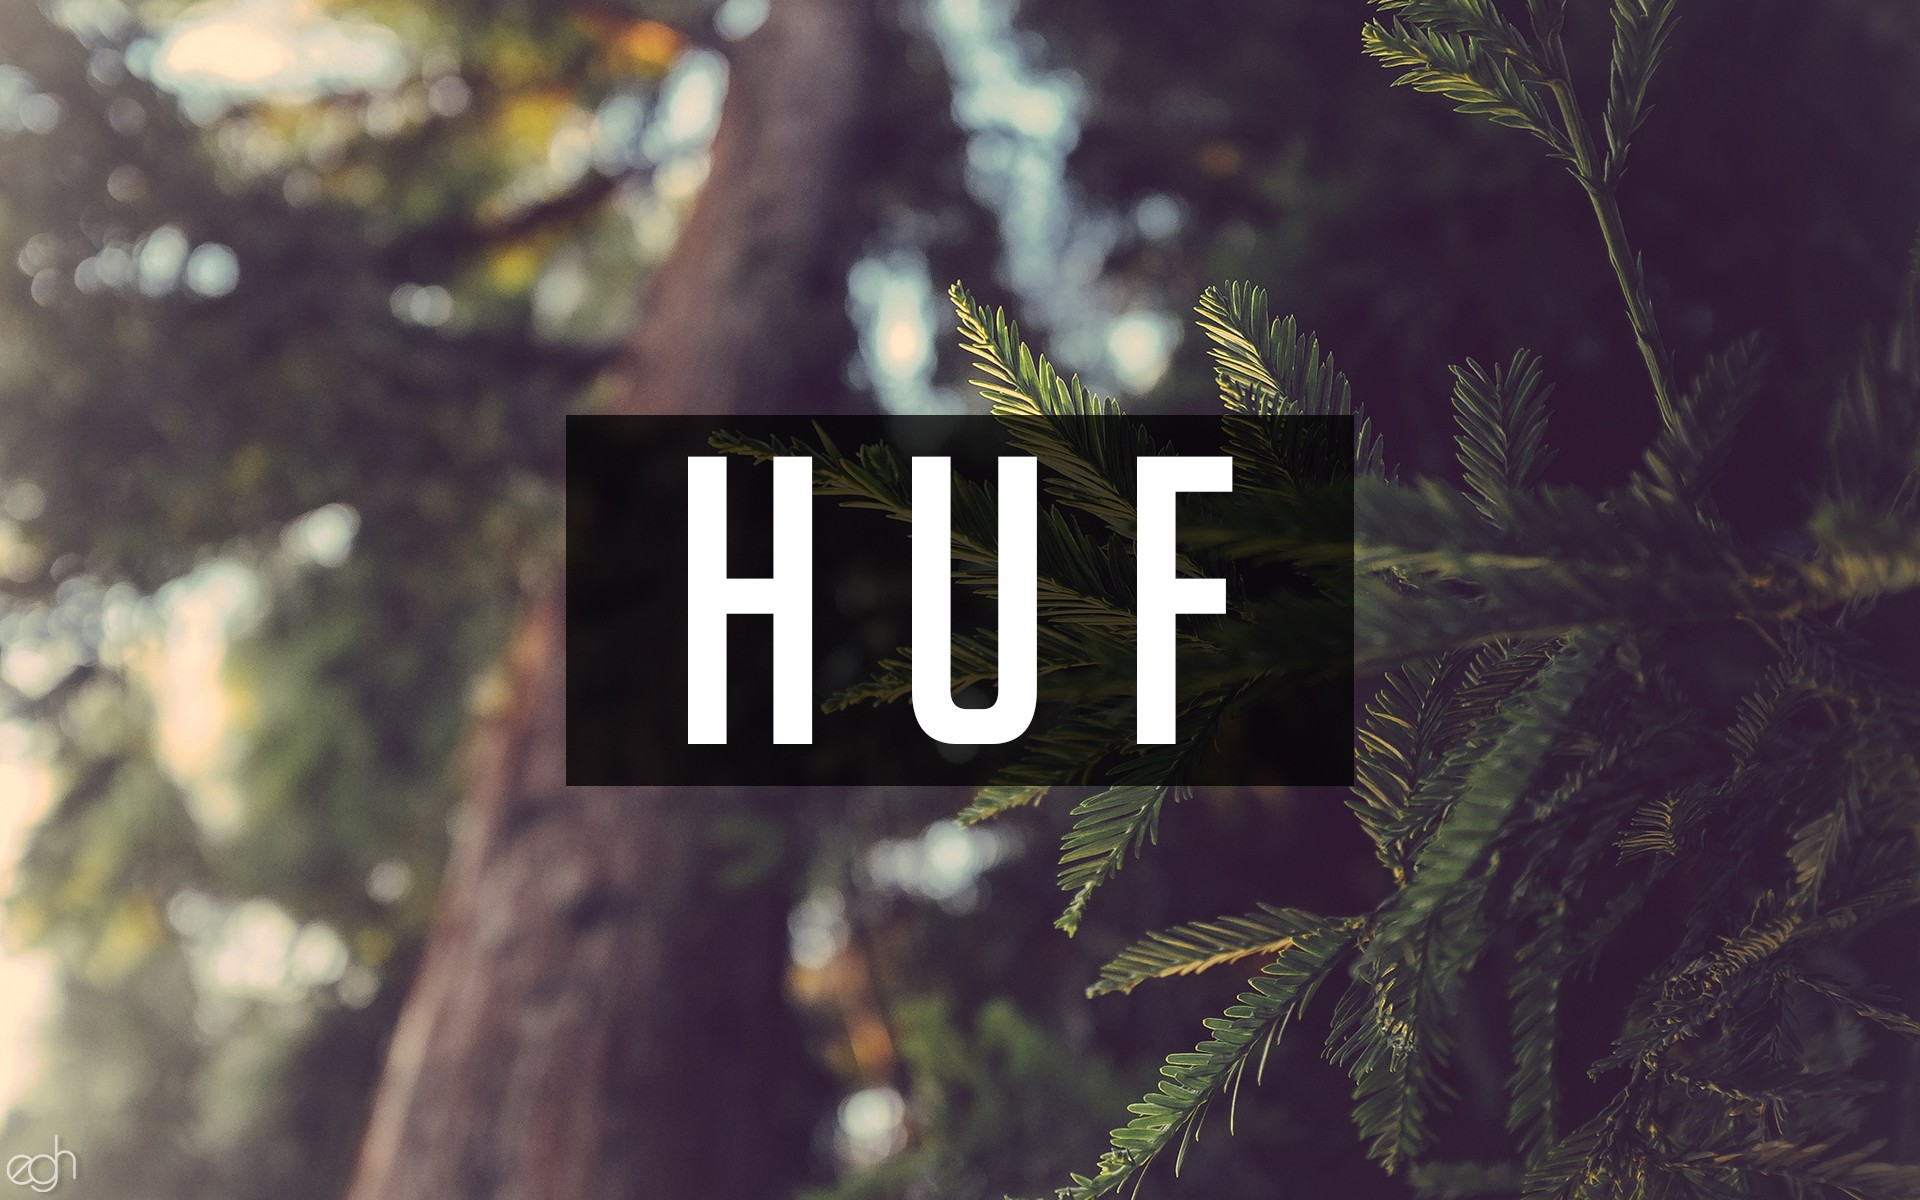 General 1920x1200 huf nature writing forest digital art text